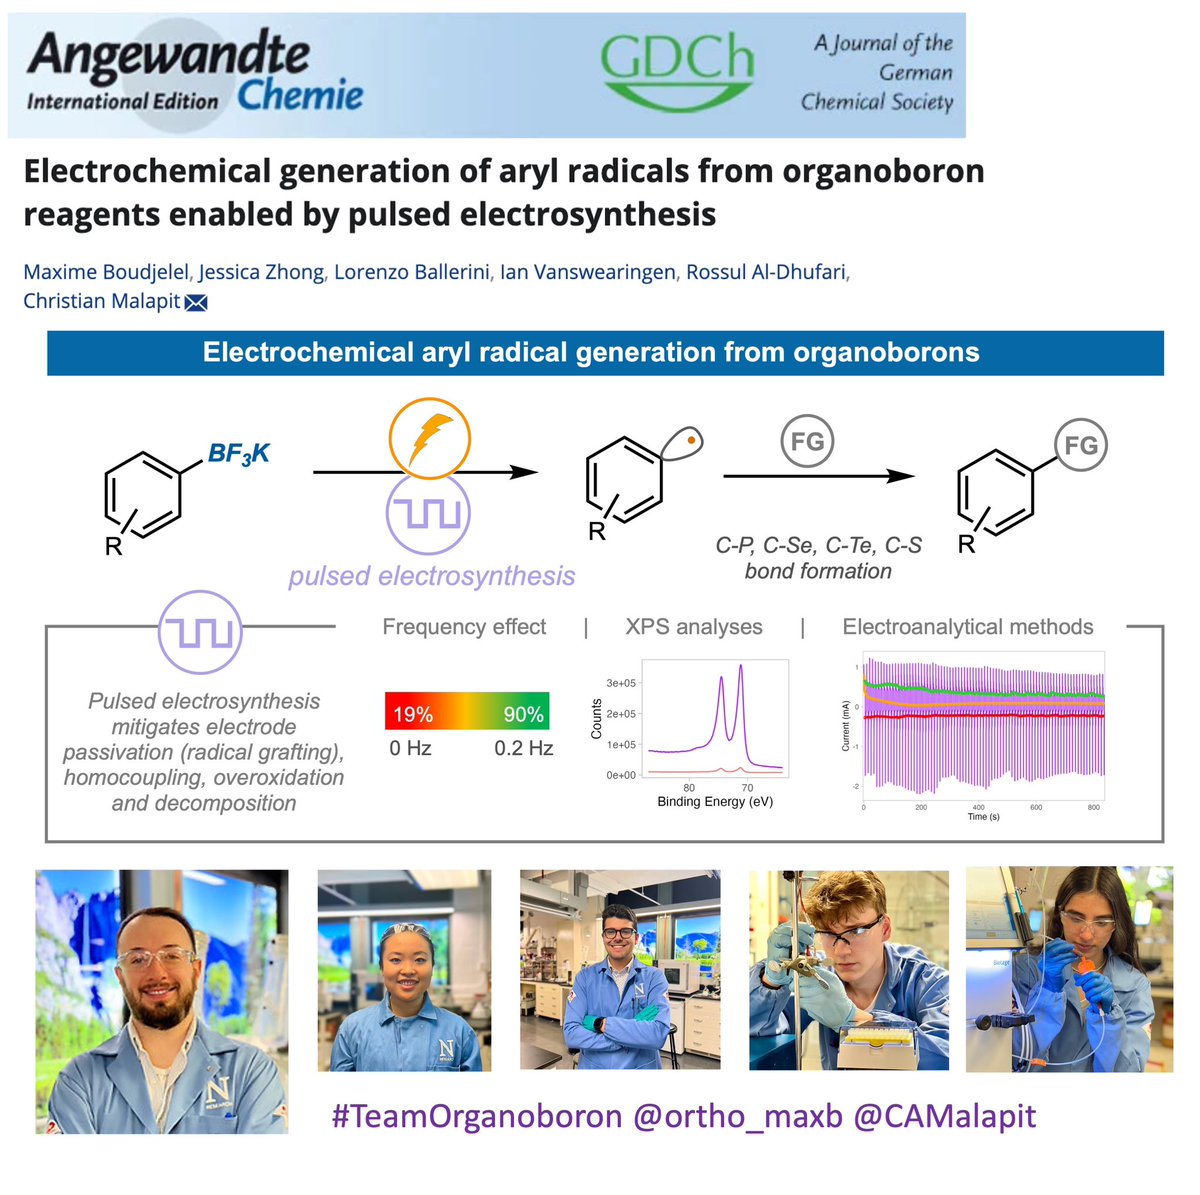 We are extremely excited to share our latest publication in @angew_chem. Electrochemical generation of aryl radicals from organoborons: challenges, mechanism, reactivity. Really proud of #TeamOrganoboron led by @ortho_maxb (now @Merck) @NUChemistry onlinelibrary.wiley.com/doi/abs/10.100…